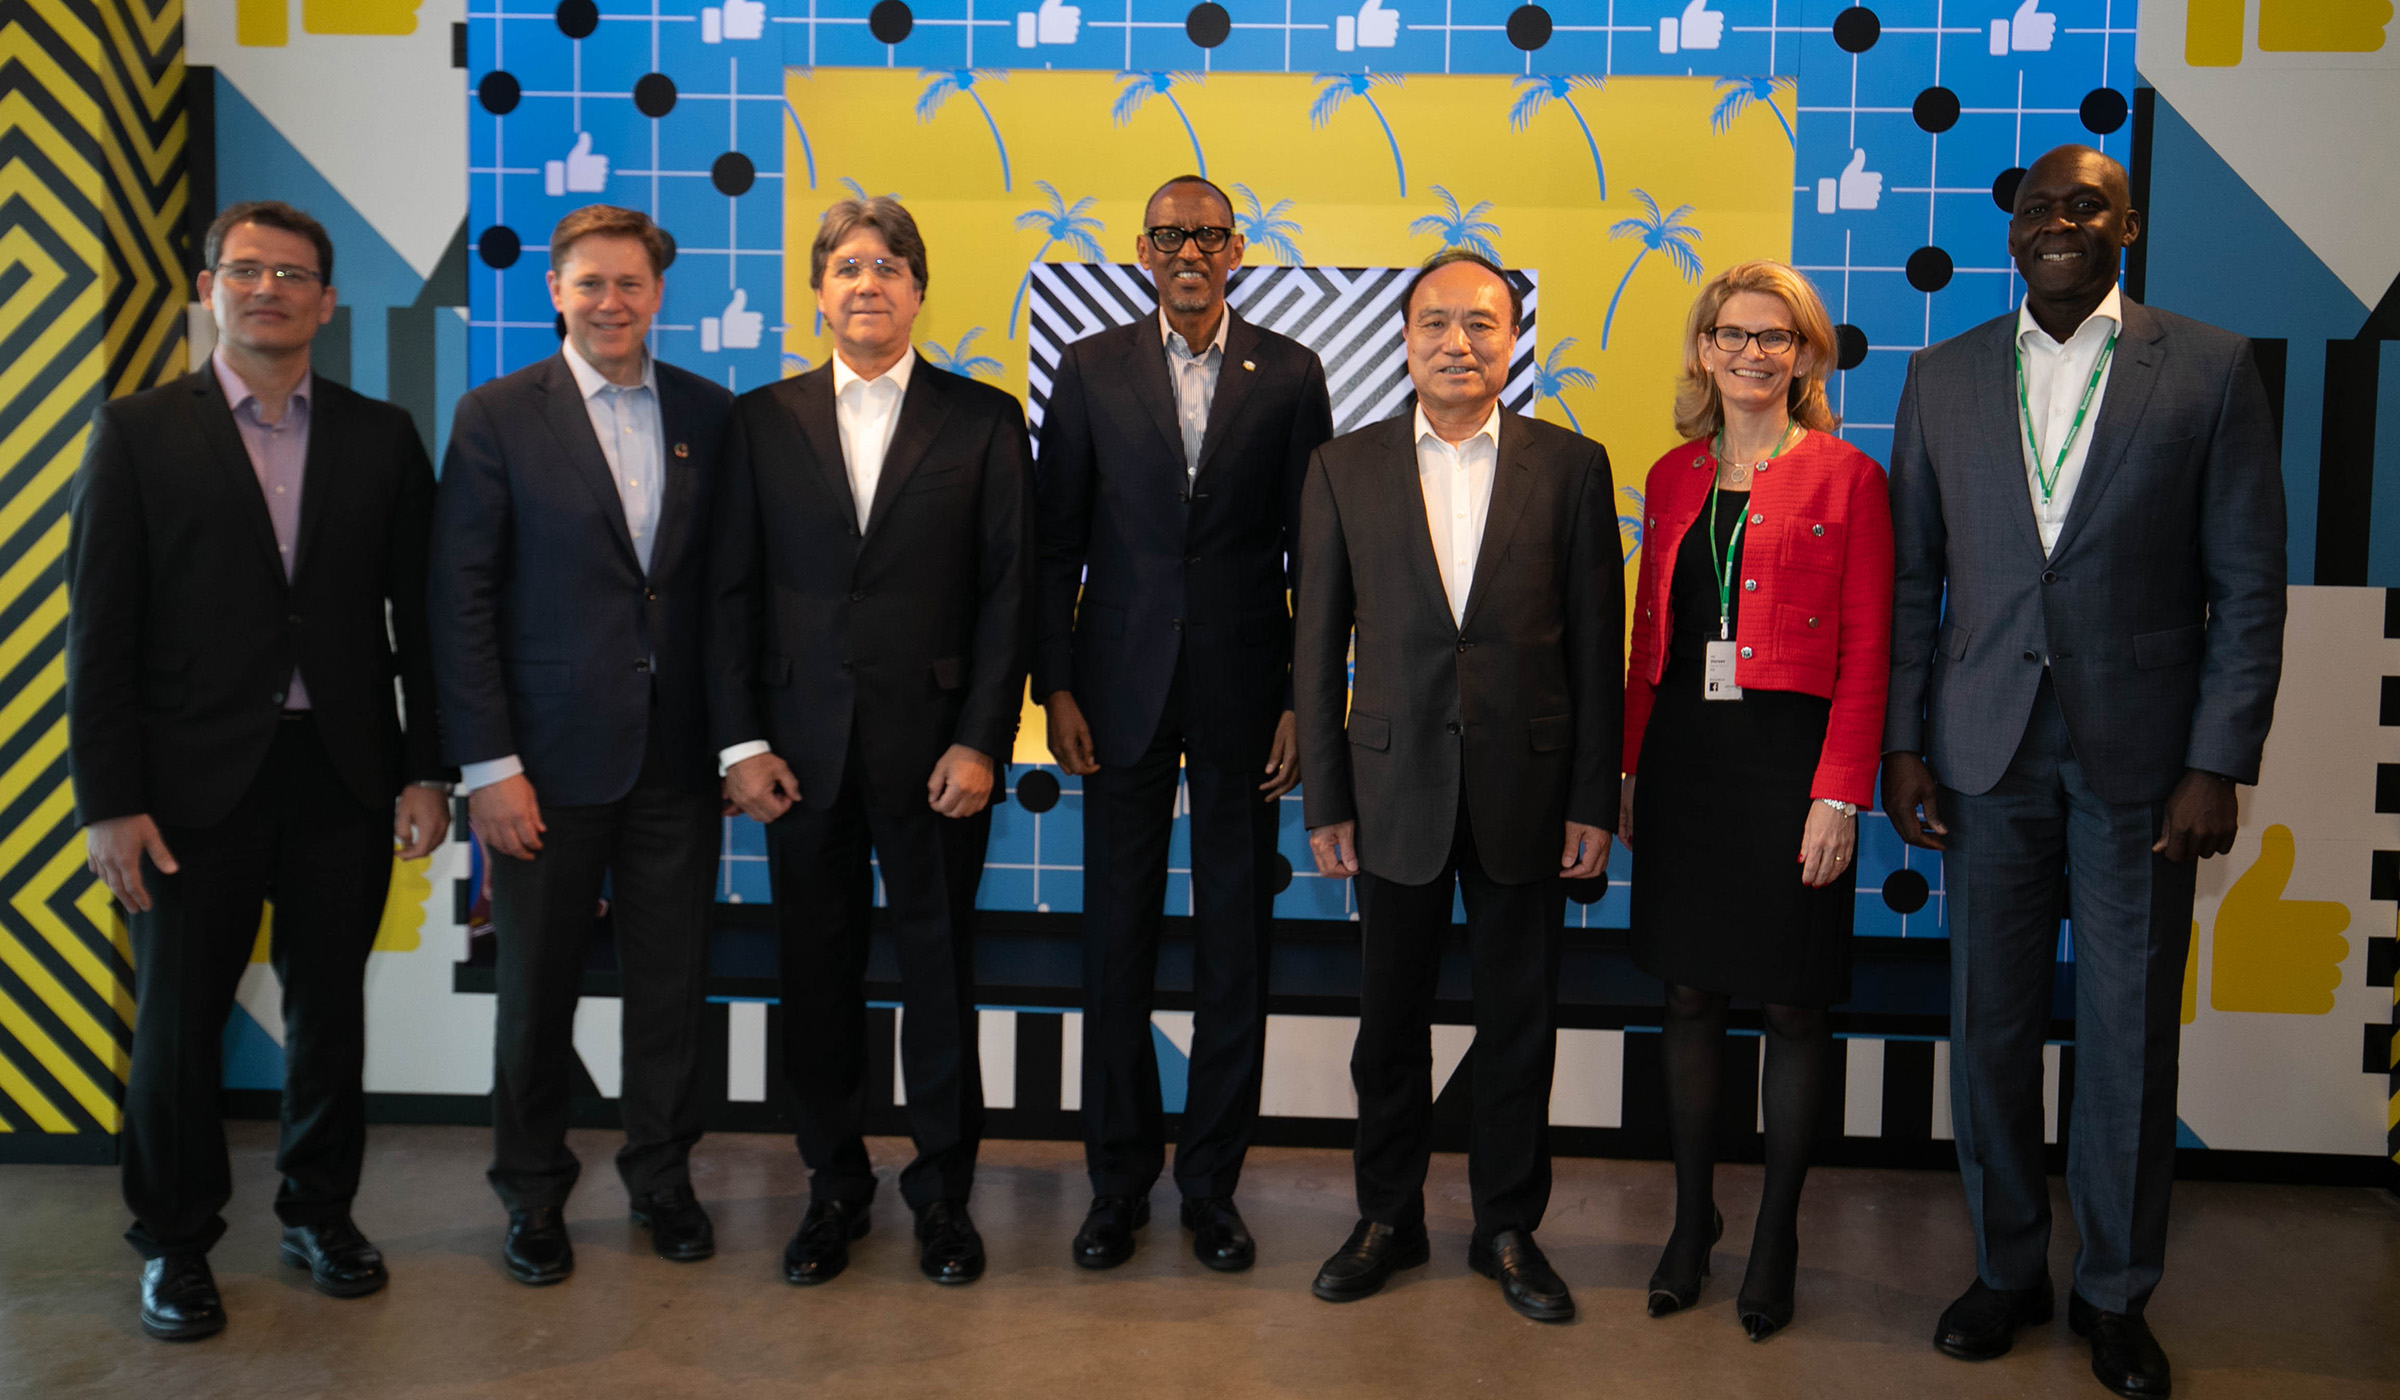 L-R: Moez Chakcbouk, Director General of UNESCO; Kevin Martin, Vice President for Mobile and Global Access Policy at Facebook; Dr Carlos Jarque, Executive Director of America Movil; President Kagame; Houlin Zhao, ITU Secretary General; Doreen Bodgan-Martin, Director of ITUu2019s Telecommunication Development Bureau and Makhtar Diop, World Banku2019s Vice President for Infrastructure at the Broadband Commission for Sustainable Development meeting in San Francisco yesterday. Village Urugwiro.